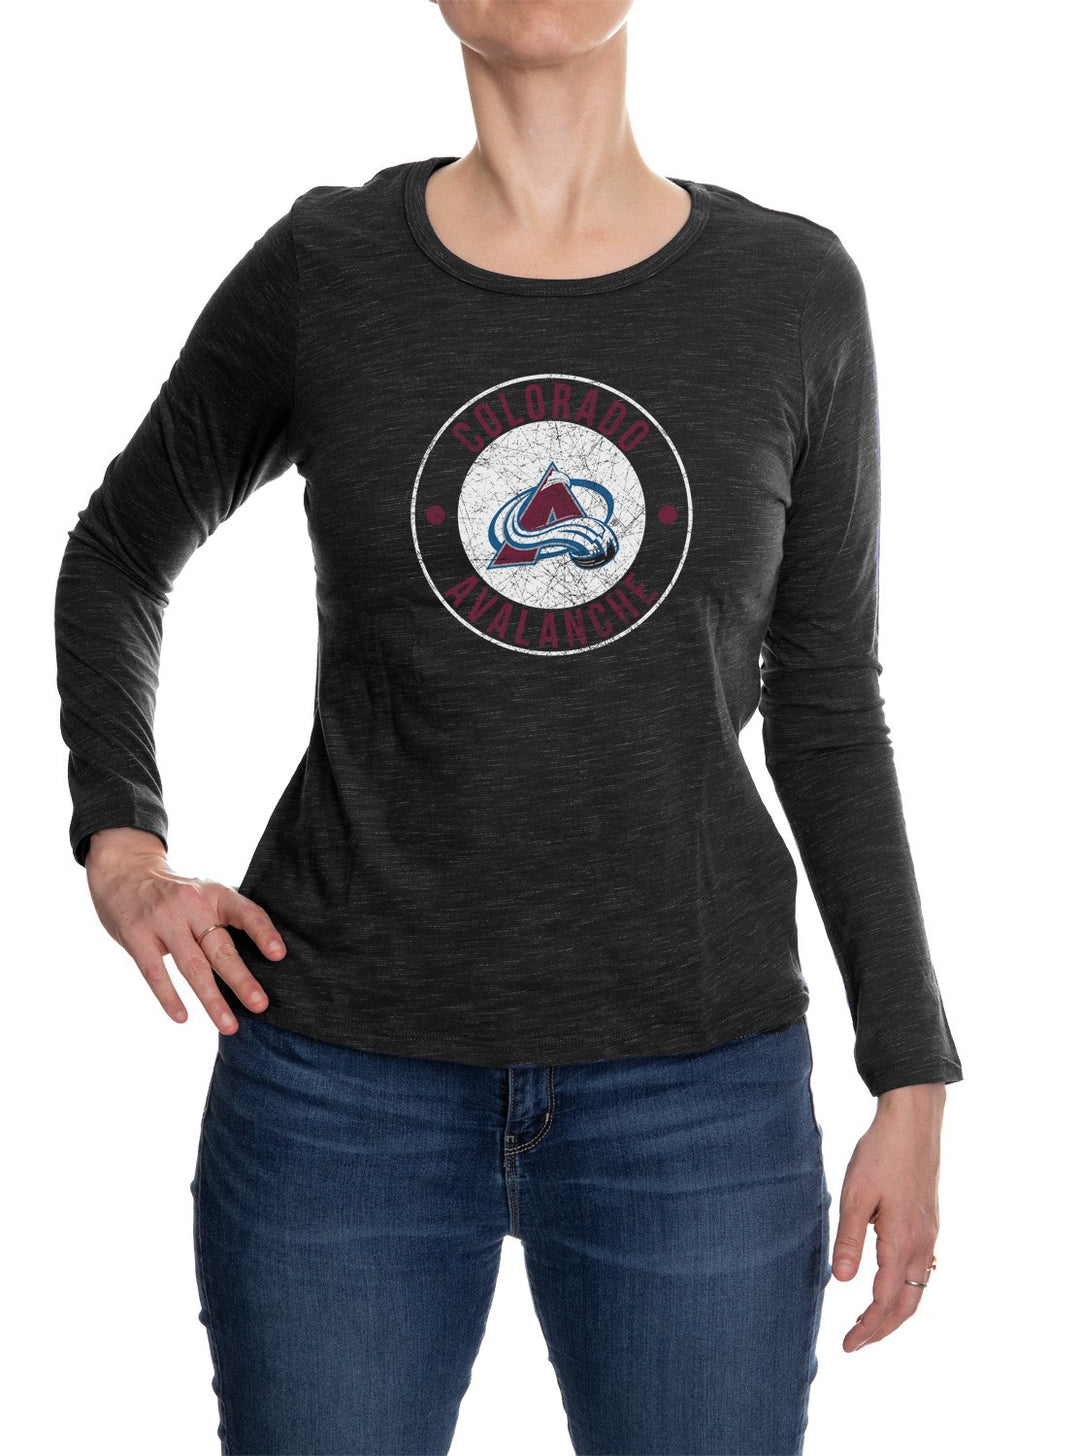 Colorado Avalanche Long Sleeve Shirt for Women in Black Front View